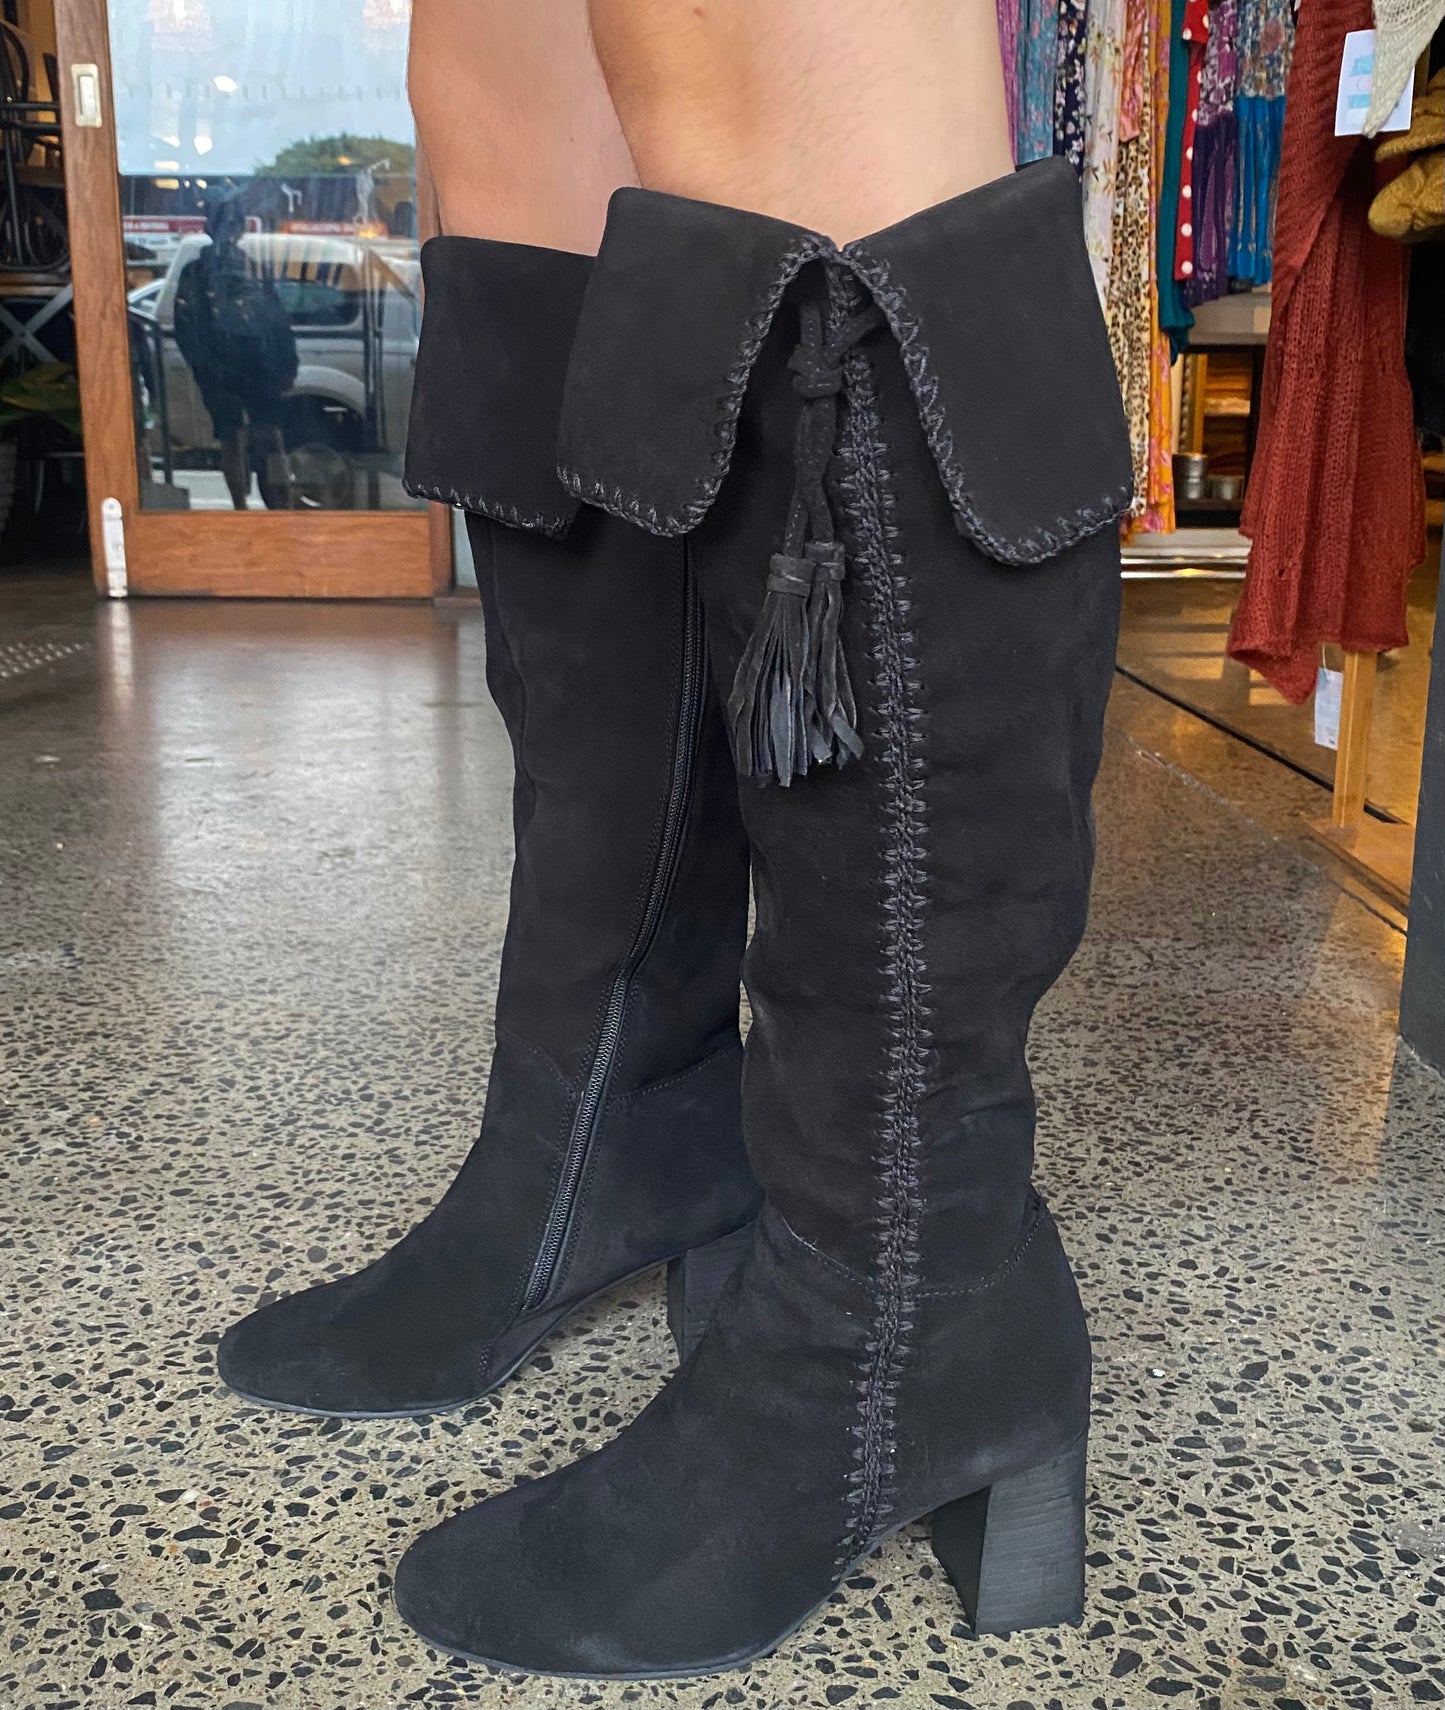 Mail Black Suede Boots